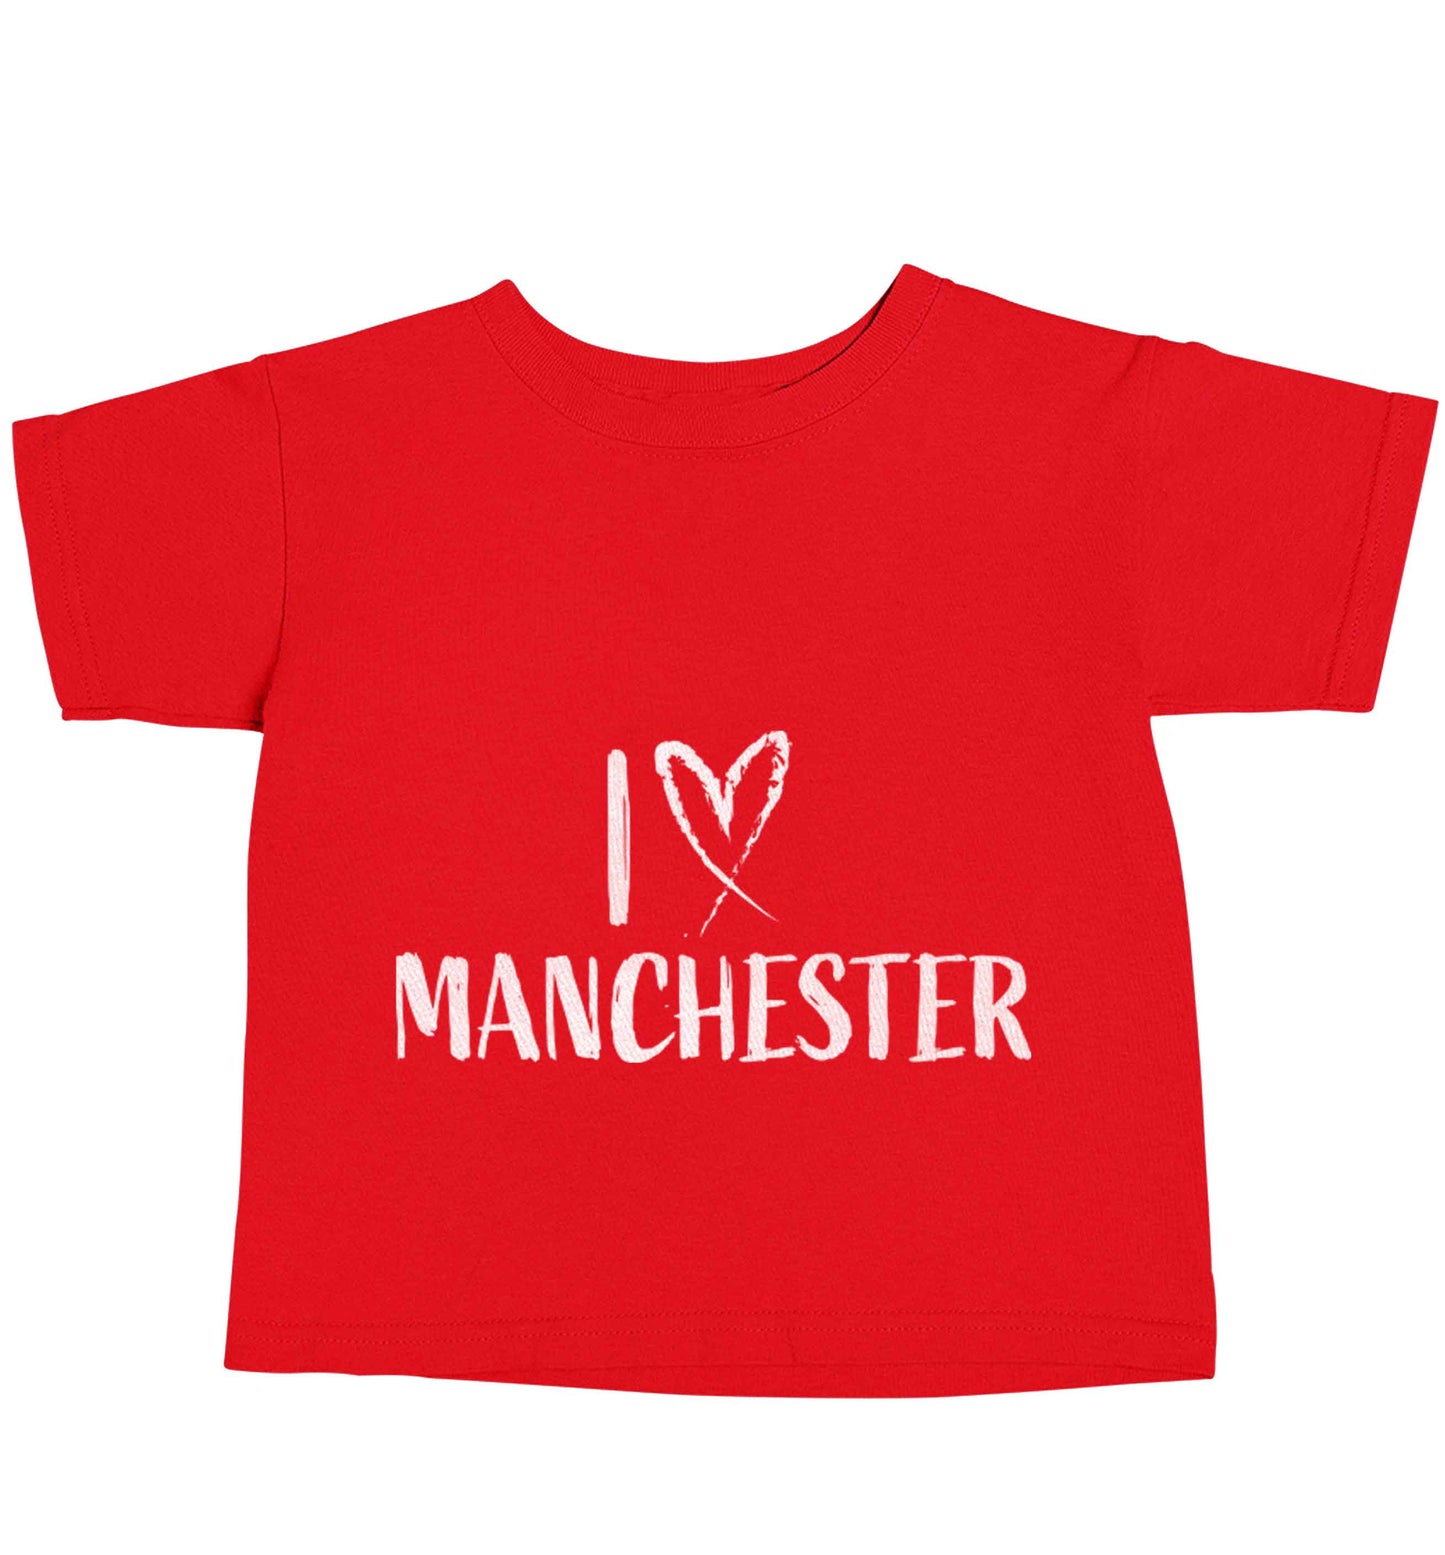 I love Manchester red baby toddler Tshirt 2 Years